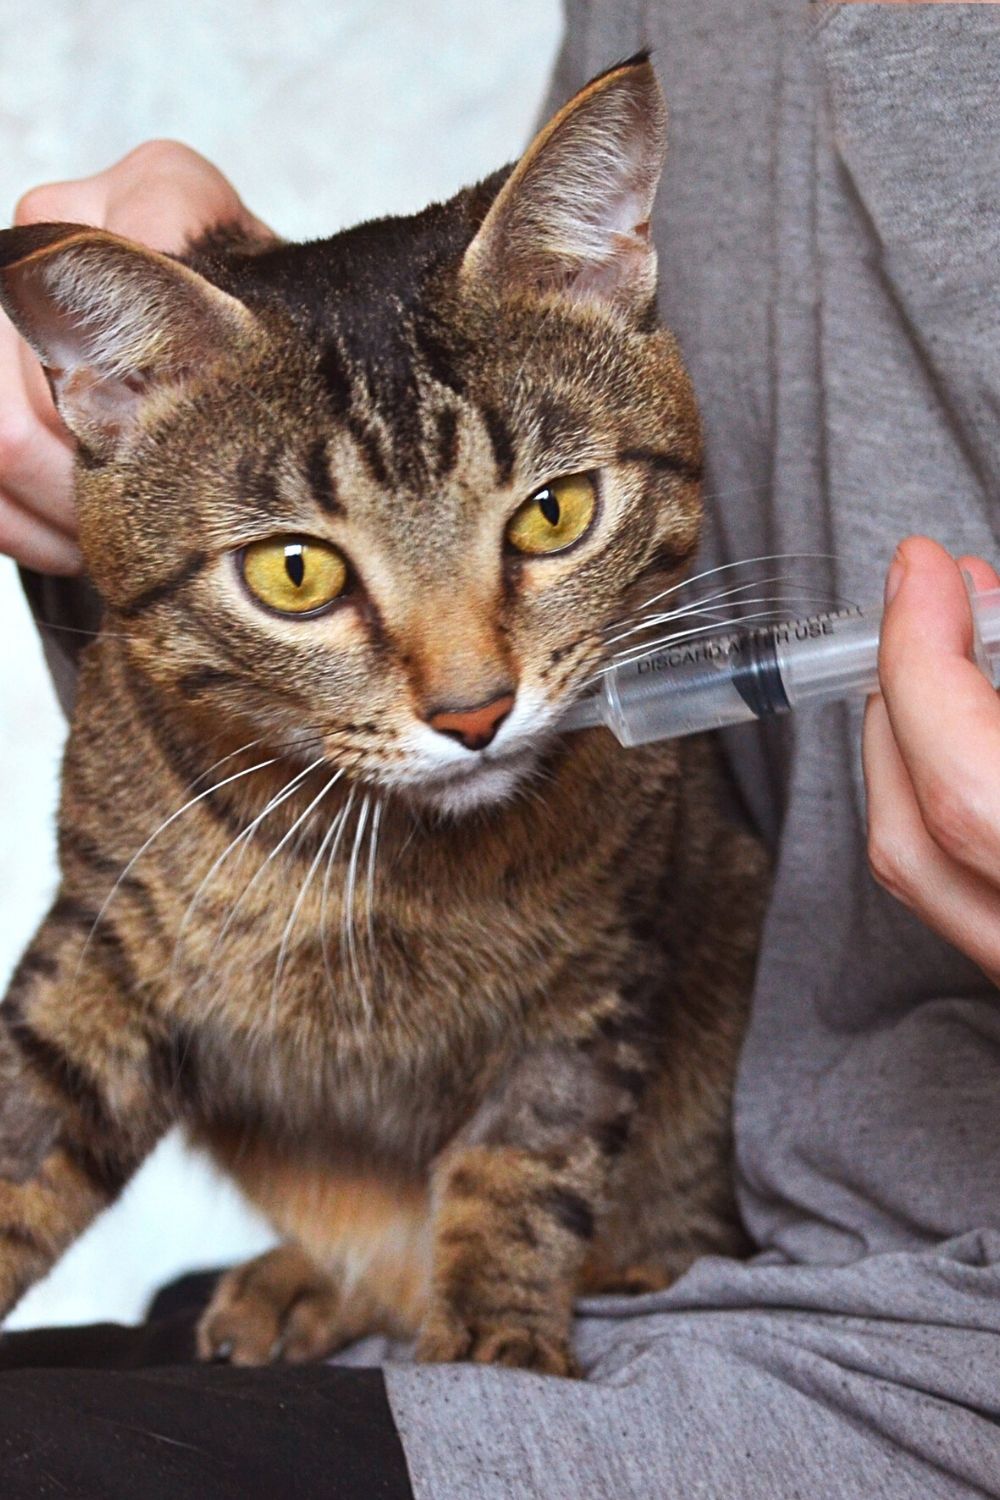 Feeding a dehydrated cat with a weak glucose solution can help it regain its energy